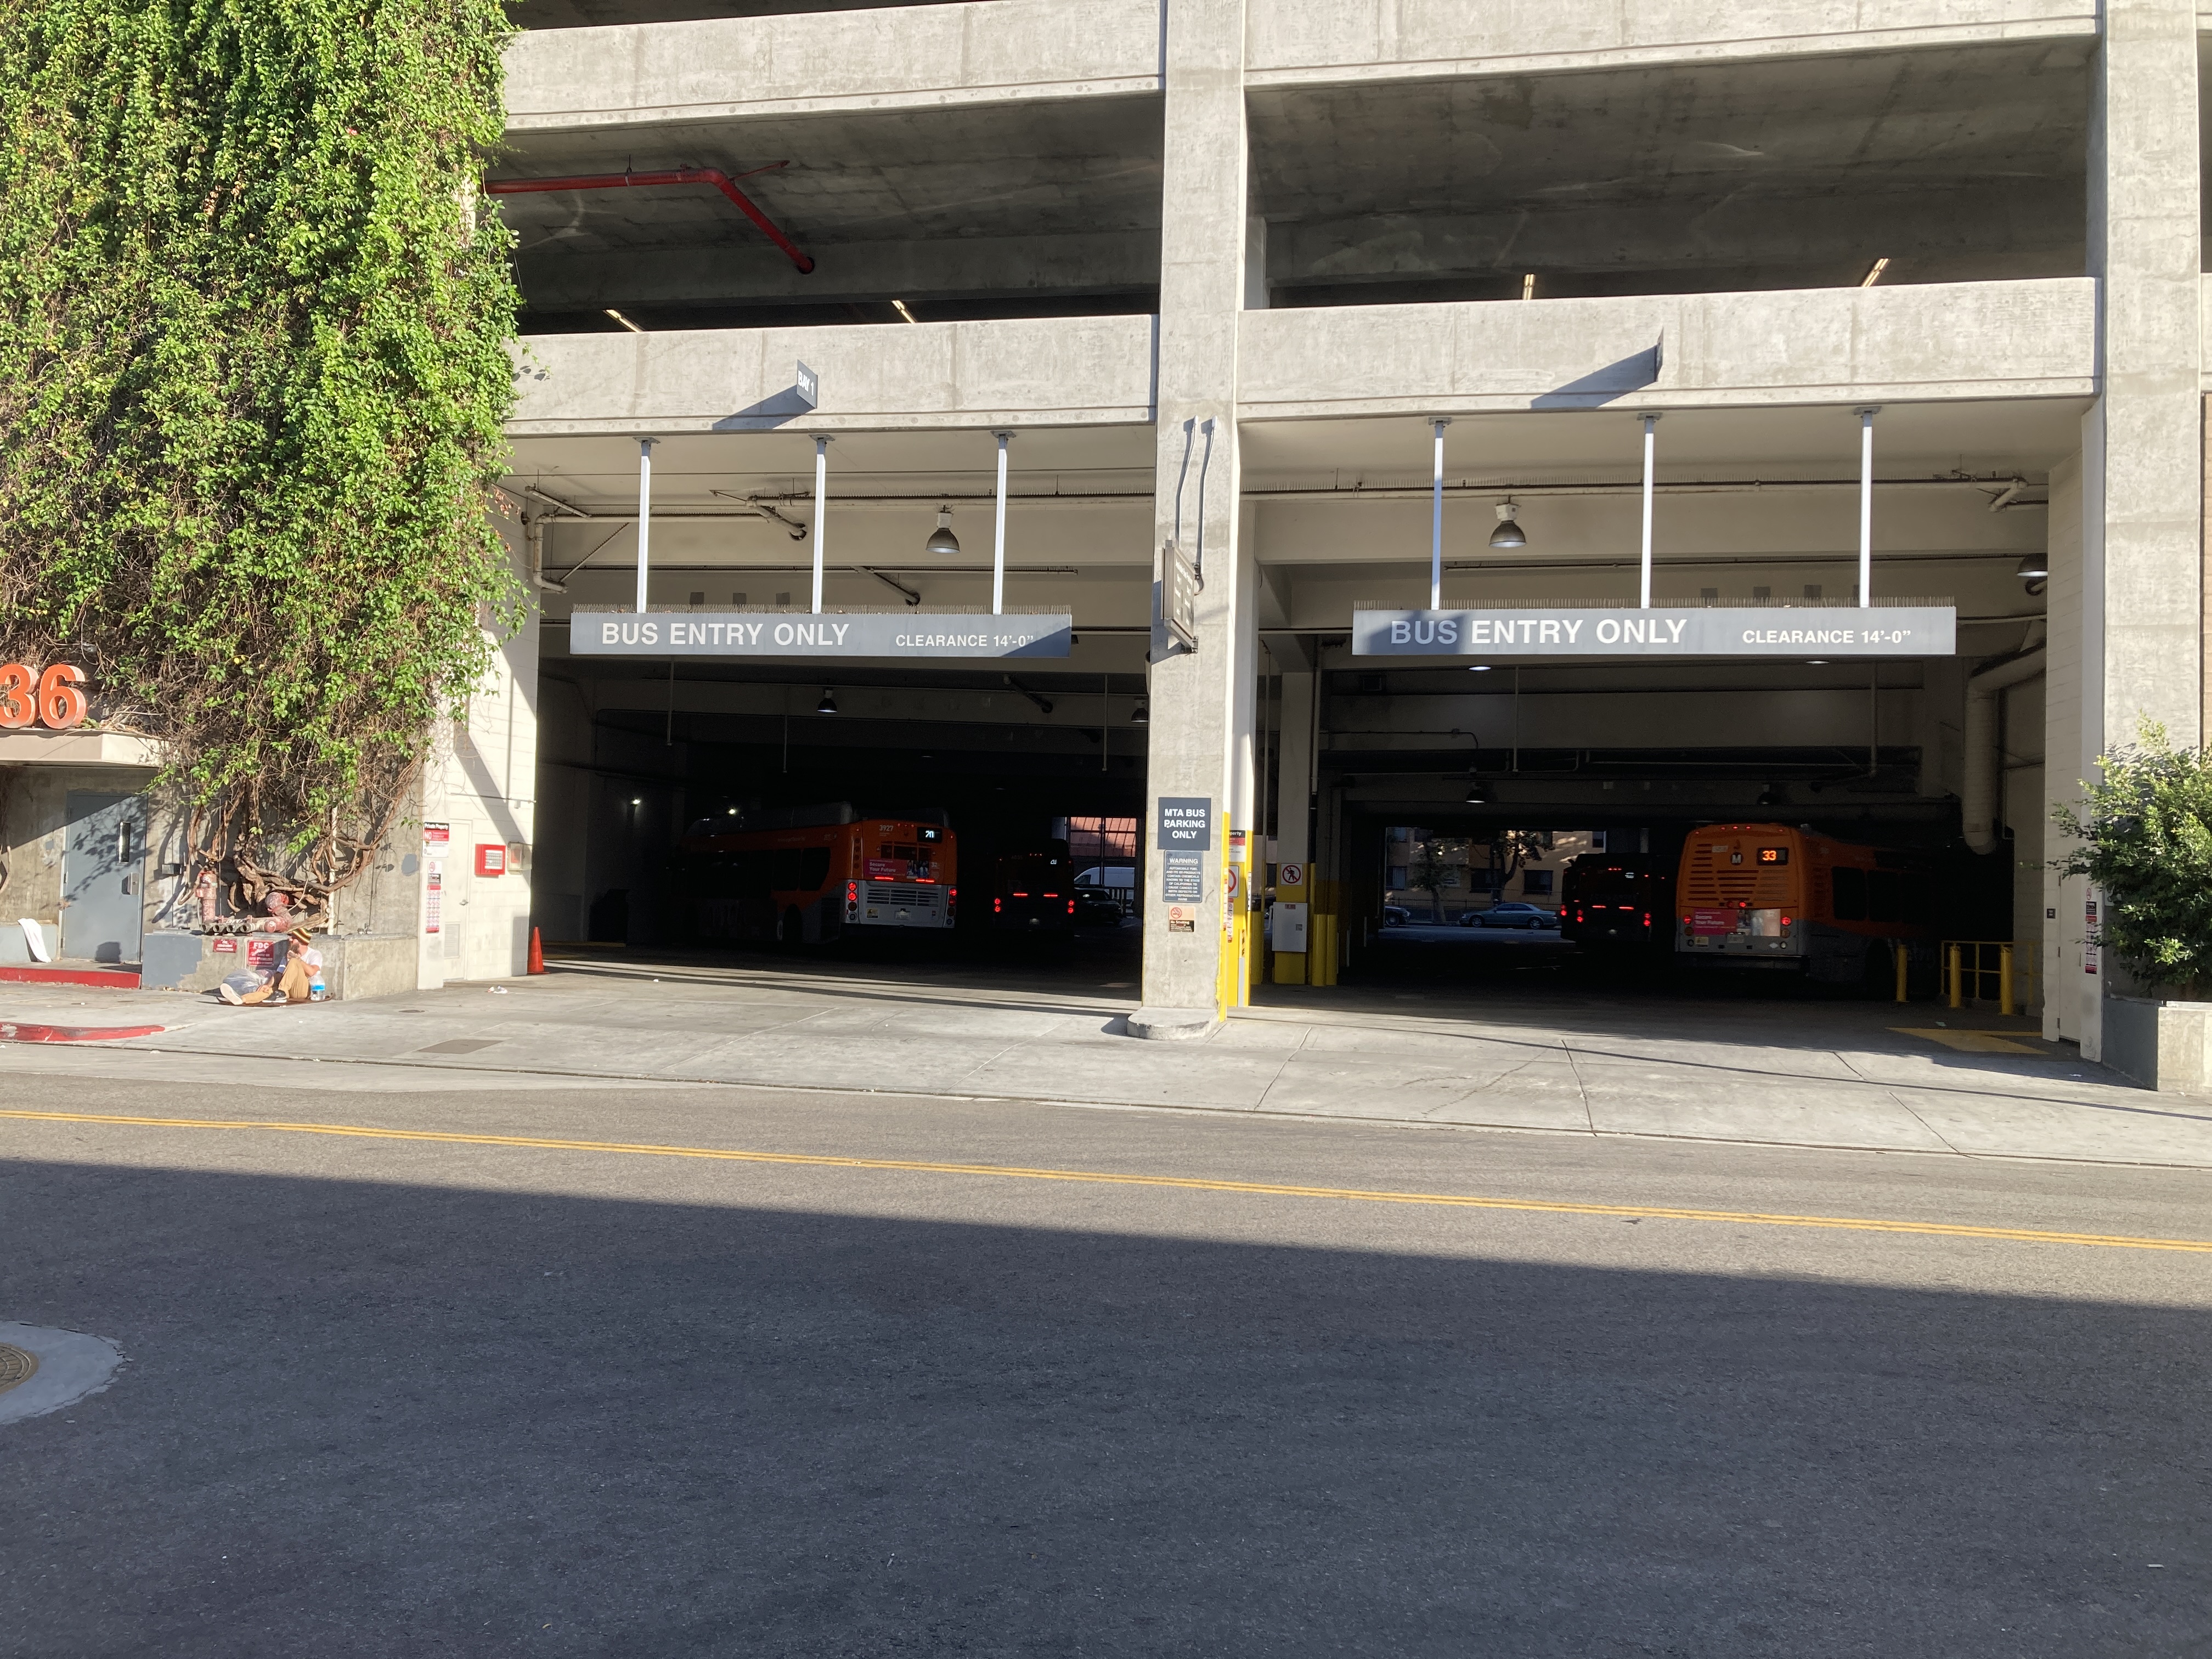 The ground floor entrance of a parking structure, signed BUS ENTRY ONLY, and five or six Metro buses can be seen waiting inside, numbered for routes 33 and 20